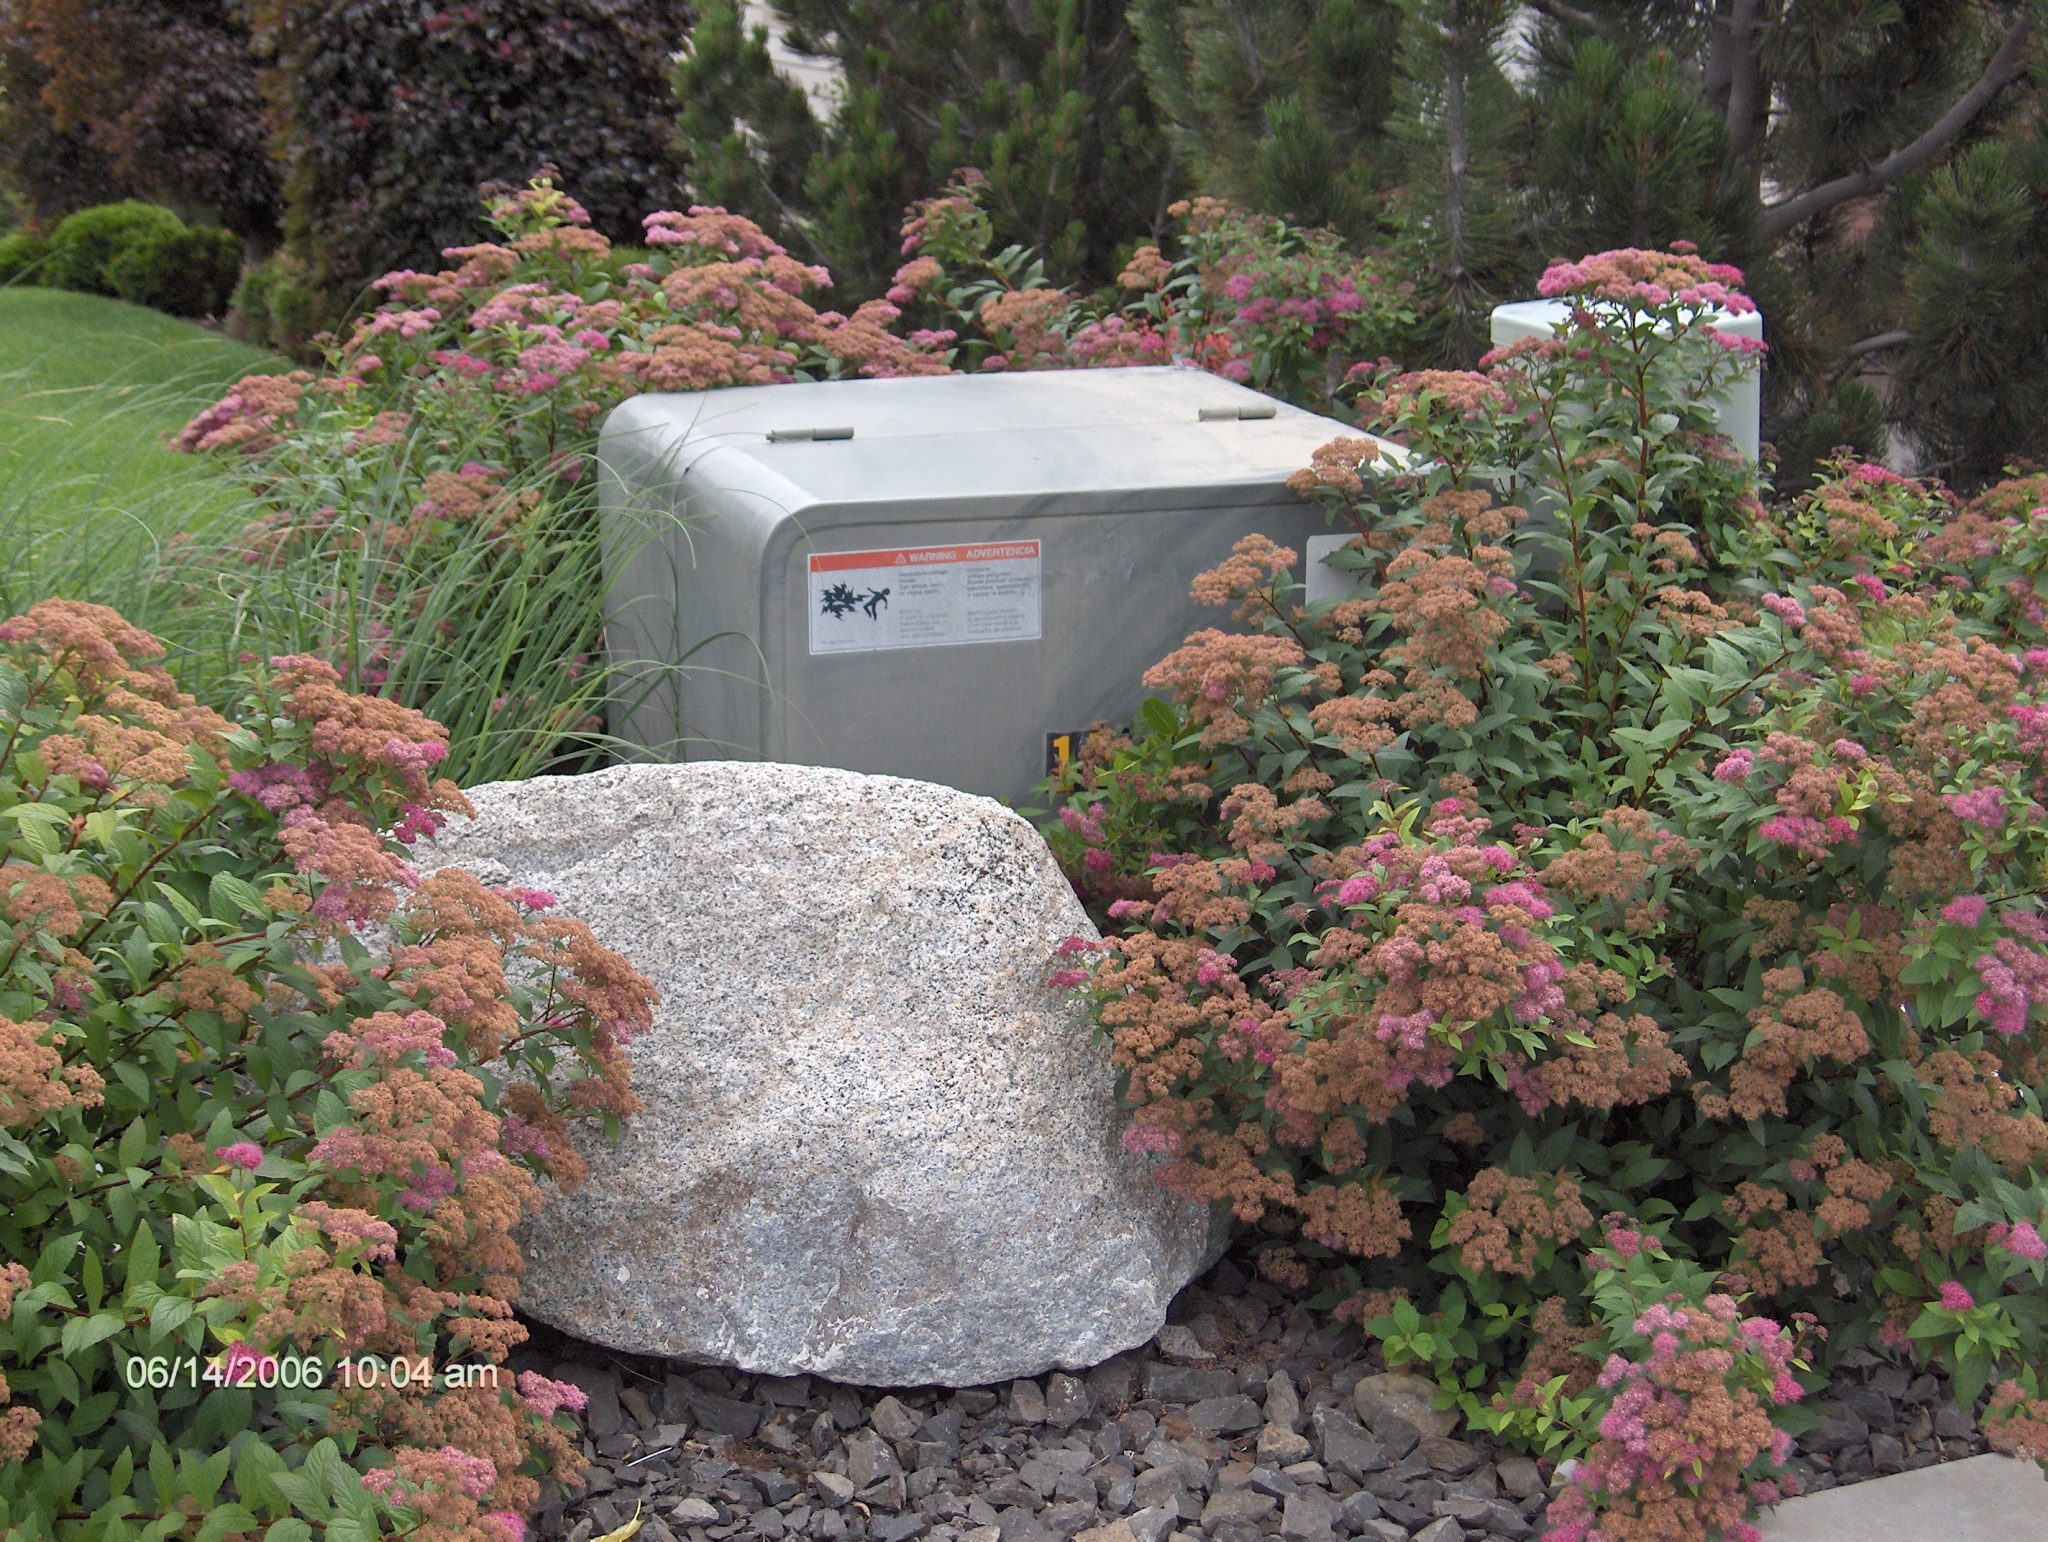 Bad example - Pat Mount Transformer is not accessible to utility workers because it is hidden by large rocks and plants